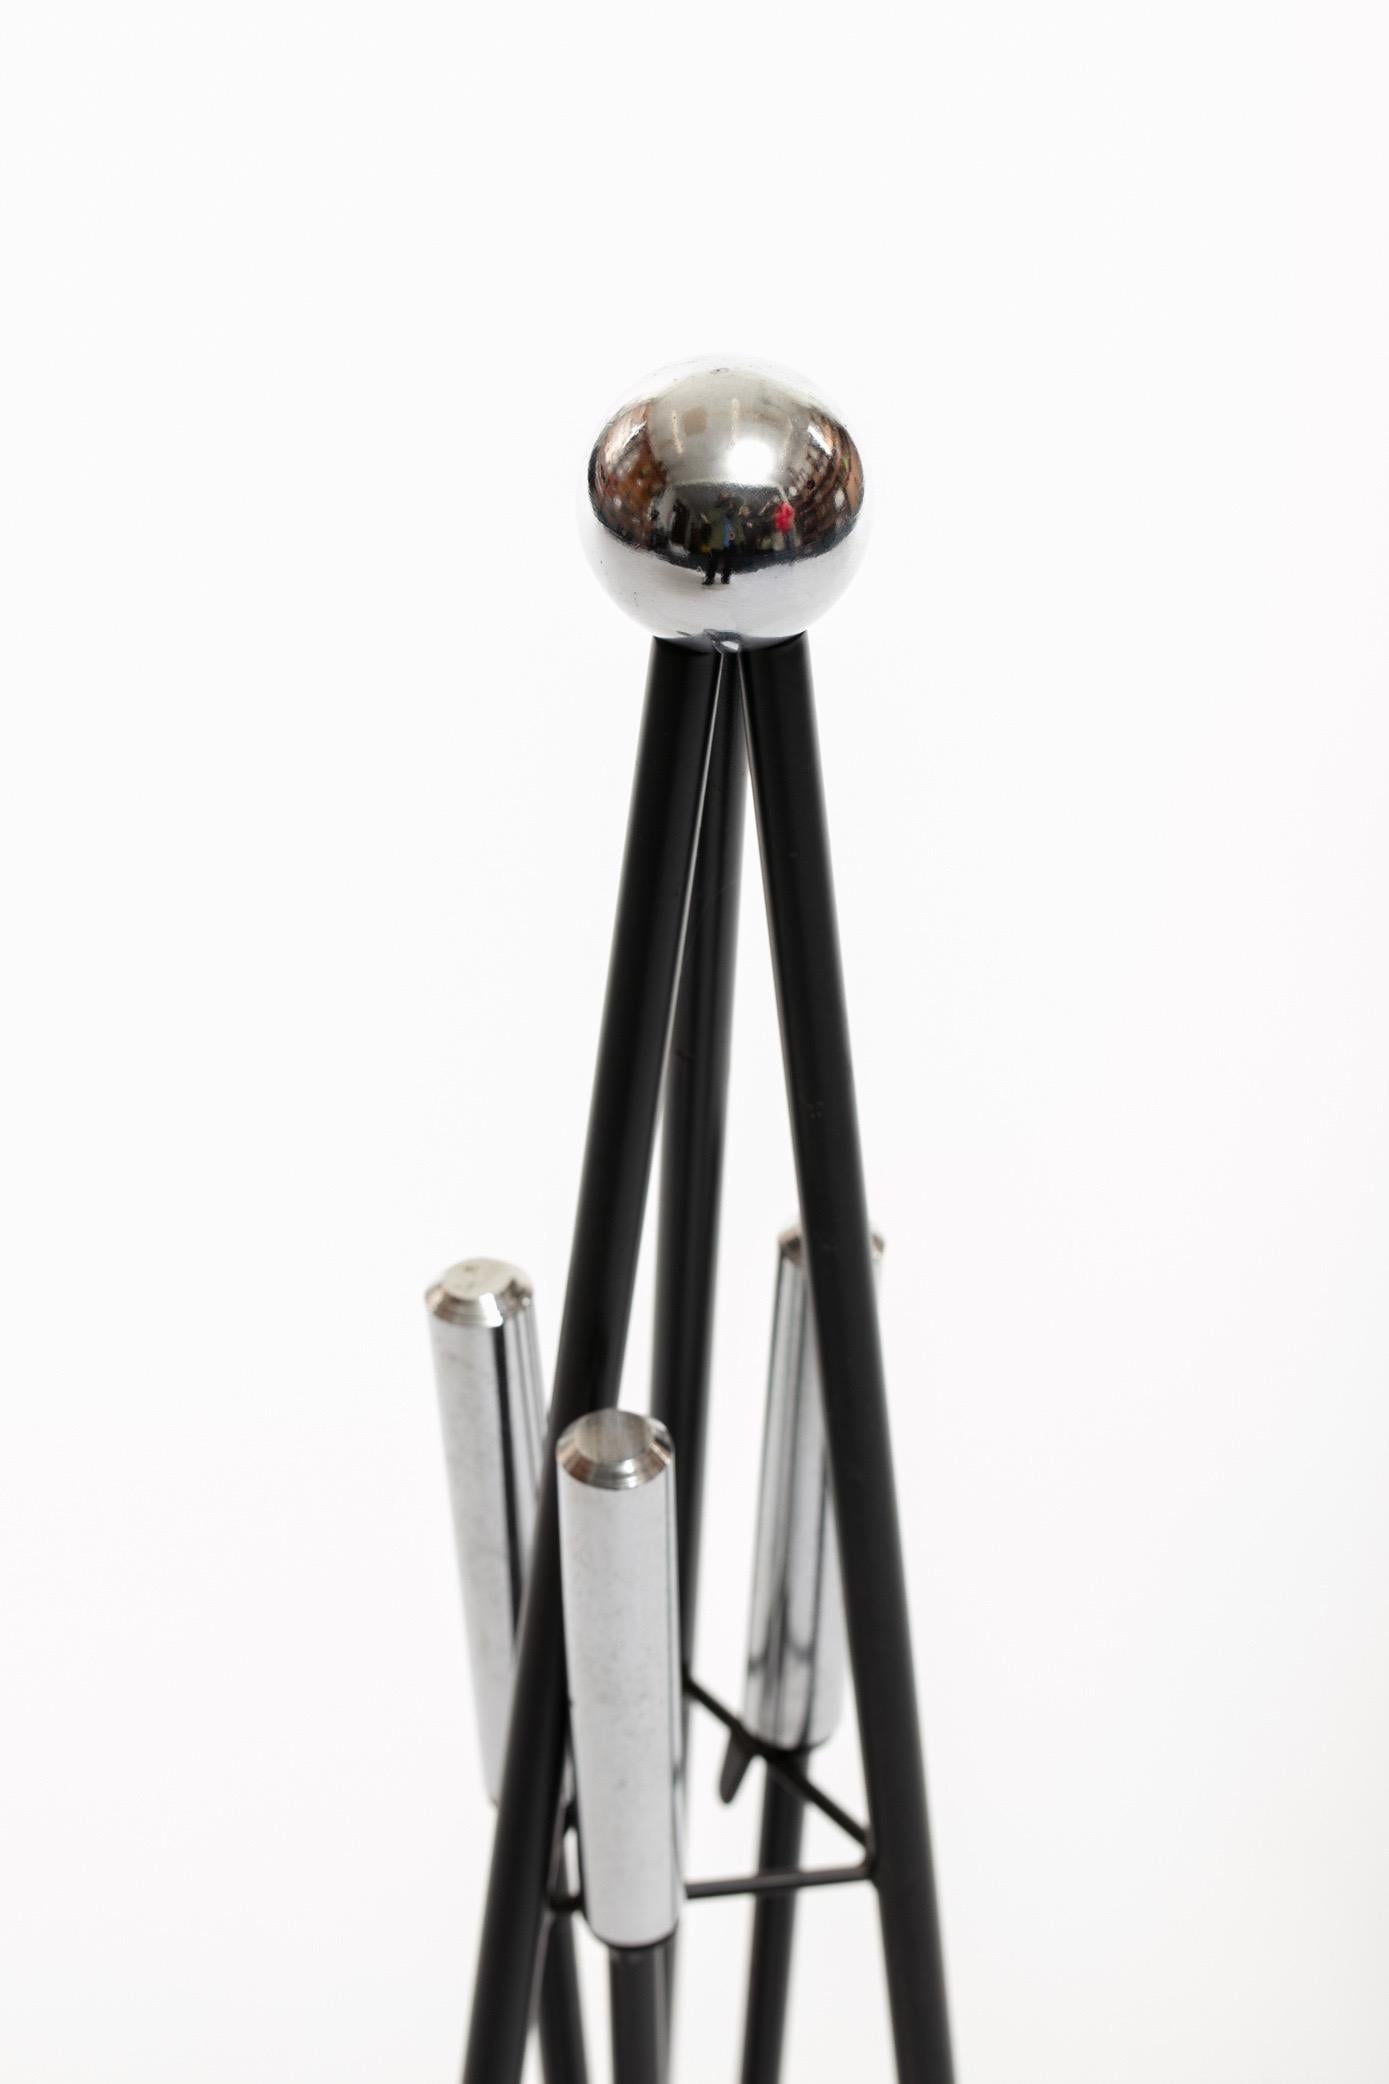 Set of modernist fireplace tools. An iron stand punctuated with nickel ball, nickel handled tools hang from the stand. This could be a nice sculptural addition you your fireplace. Want to see more beautiful things? Scroll down below and click 